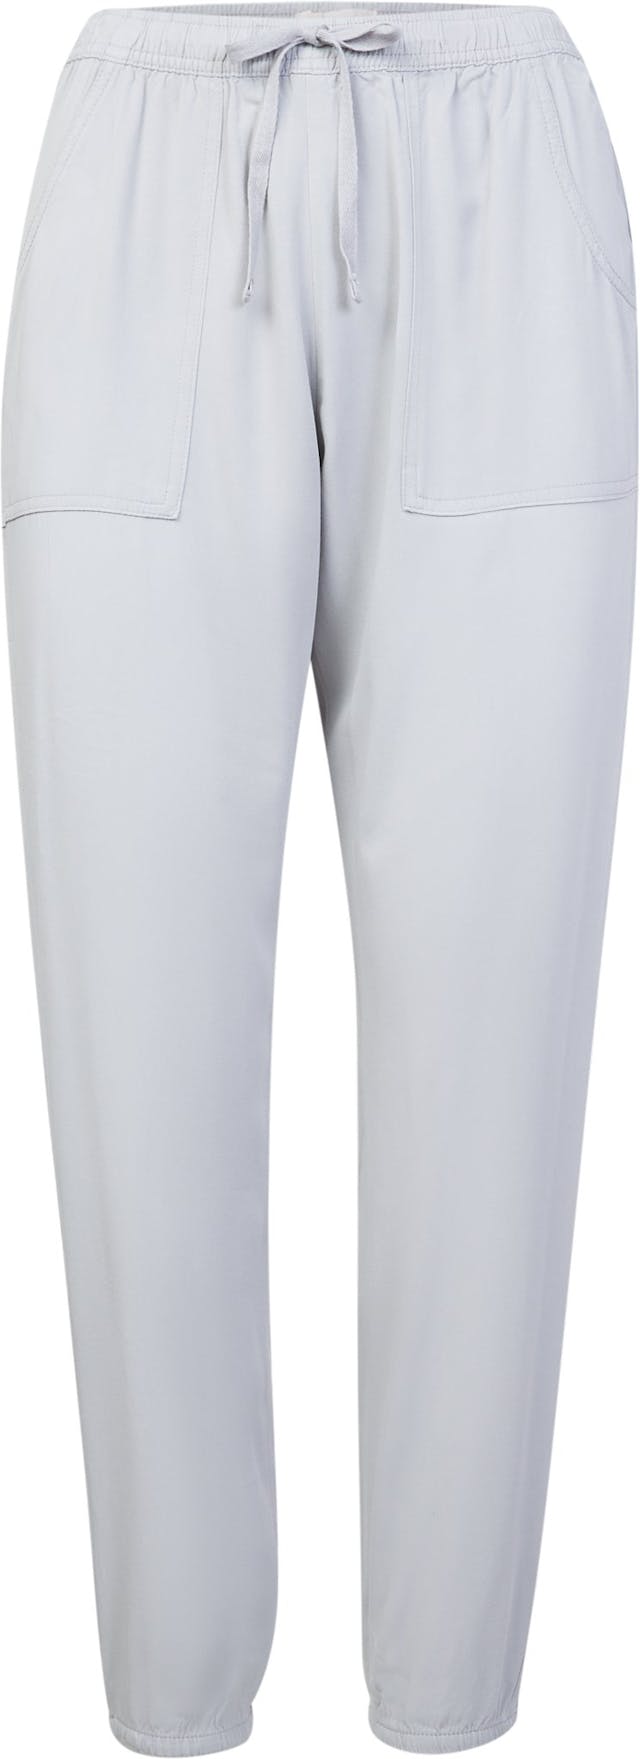 Product image for Fern Pants 2.0 - Women's